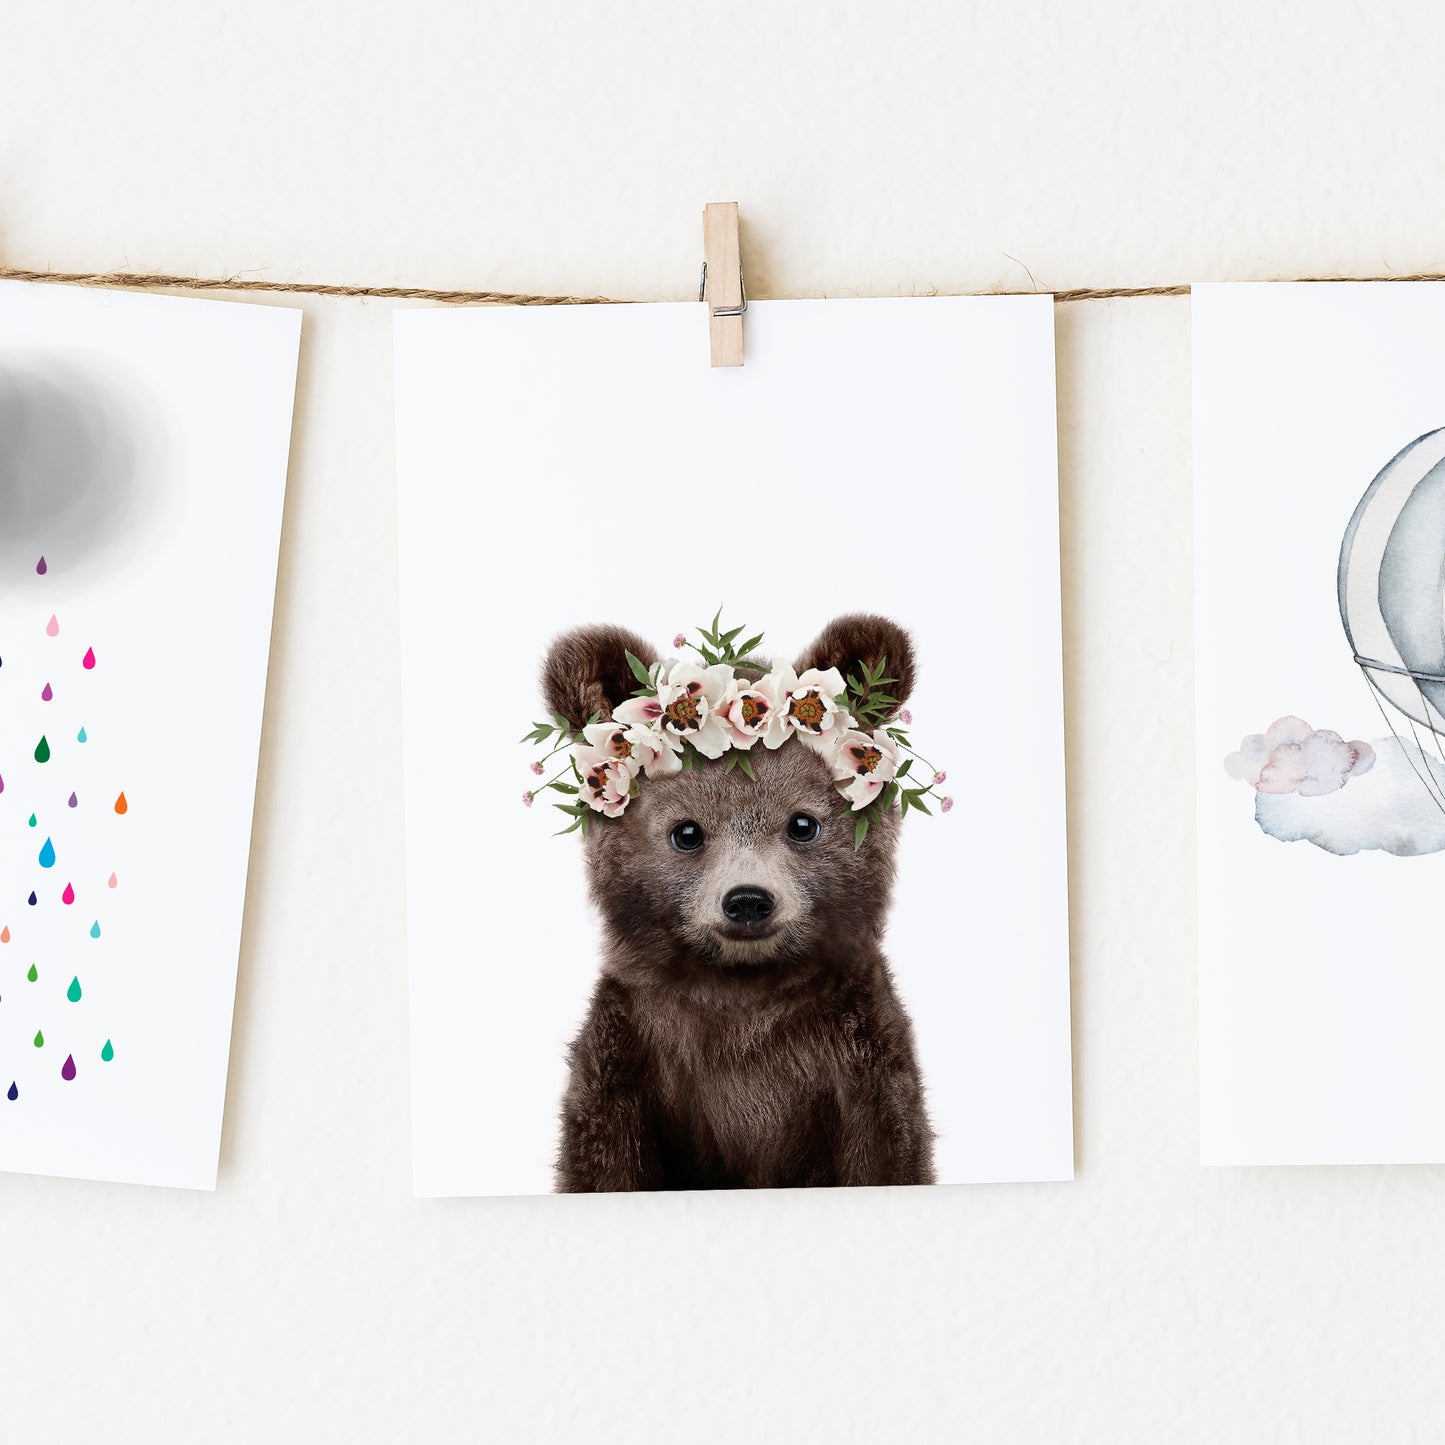 A picture of a baby bear wearing a flower crown.